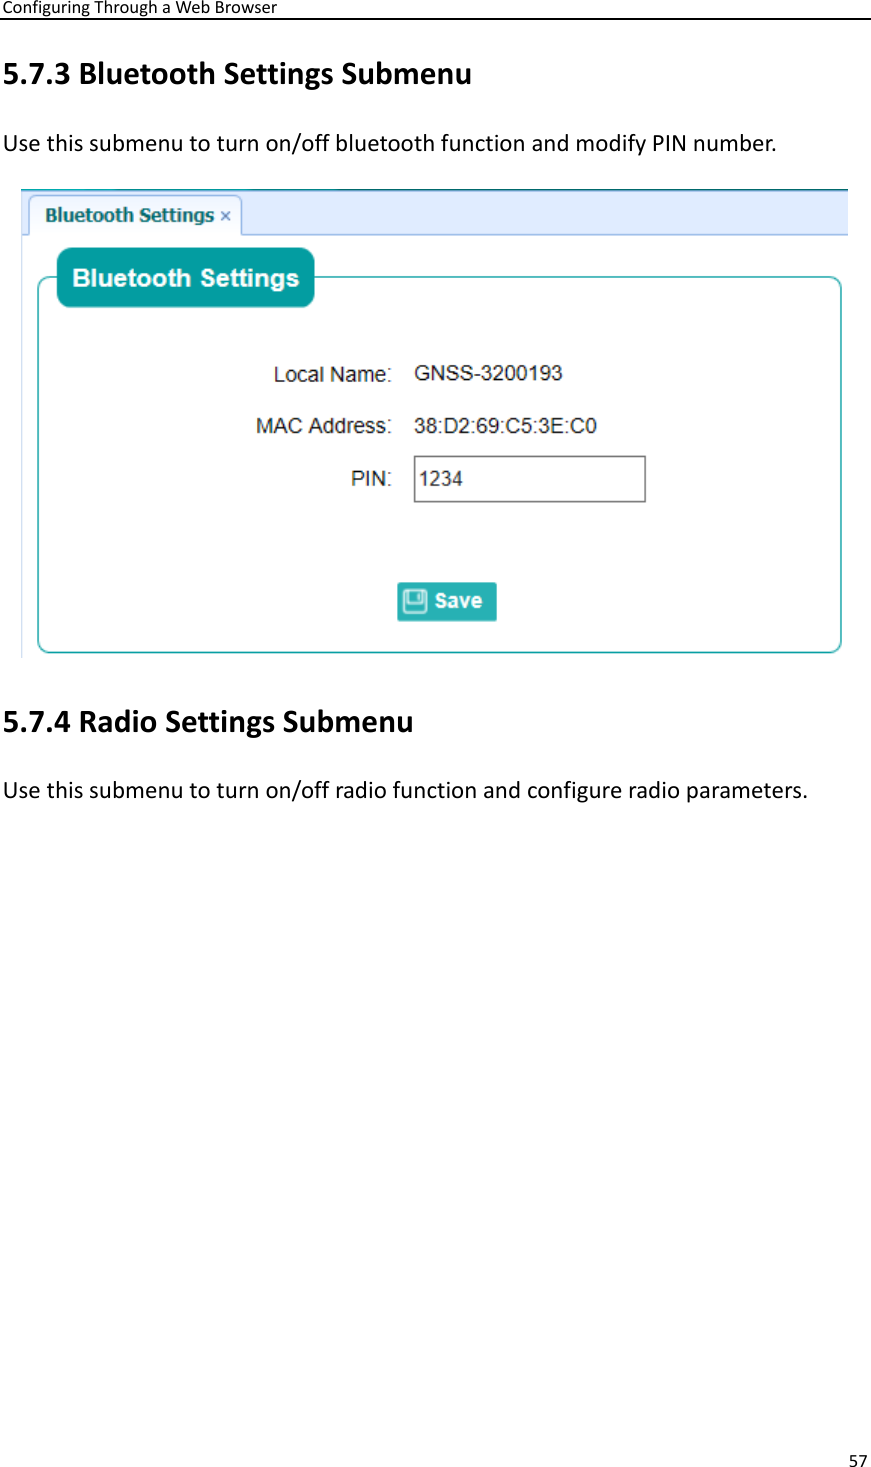 Configuring Through a Web Browser 57  5.7.3 Bluetooth Settings Submenu   Use this submenu to turn on/off bluetooth function and modify PIN number.   5.7.4 Radio Settings Submenu   Use this submenu to turn on/off radio function and configure radio parameters. 